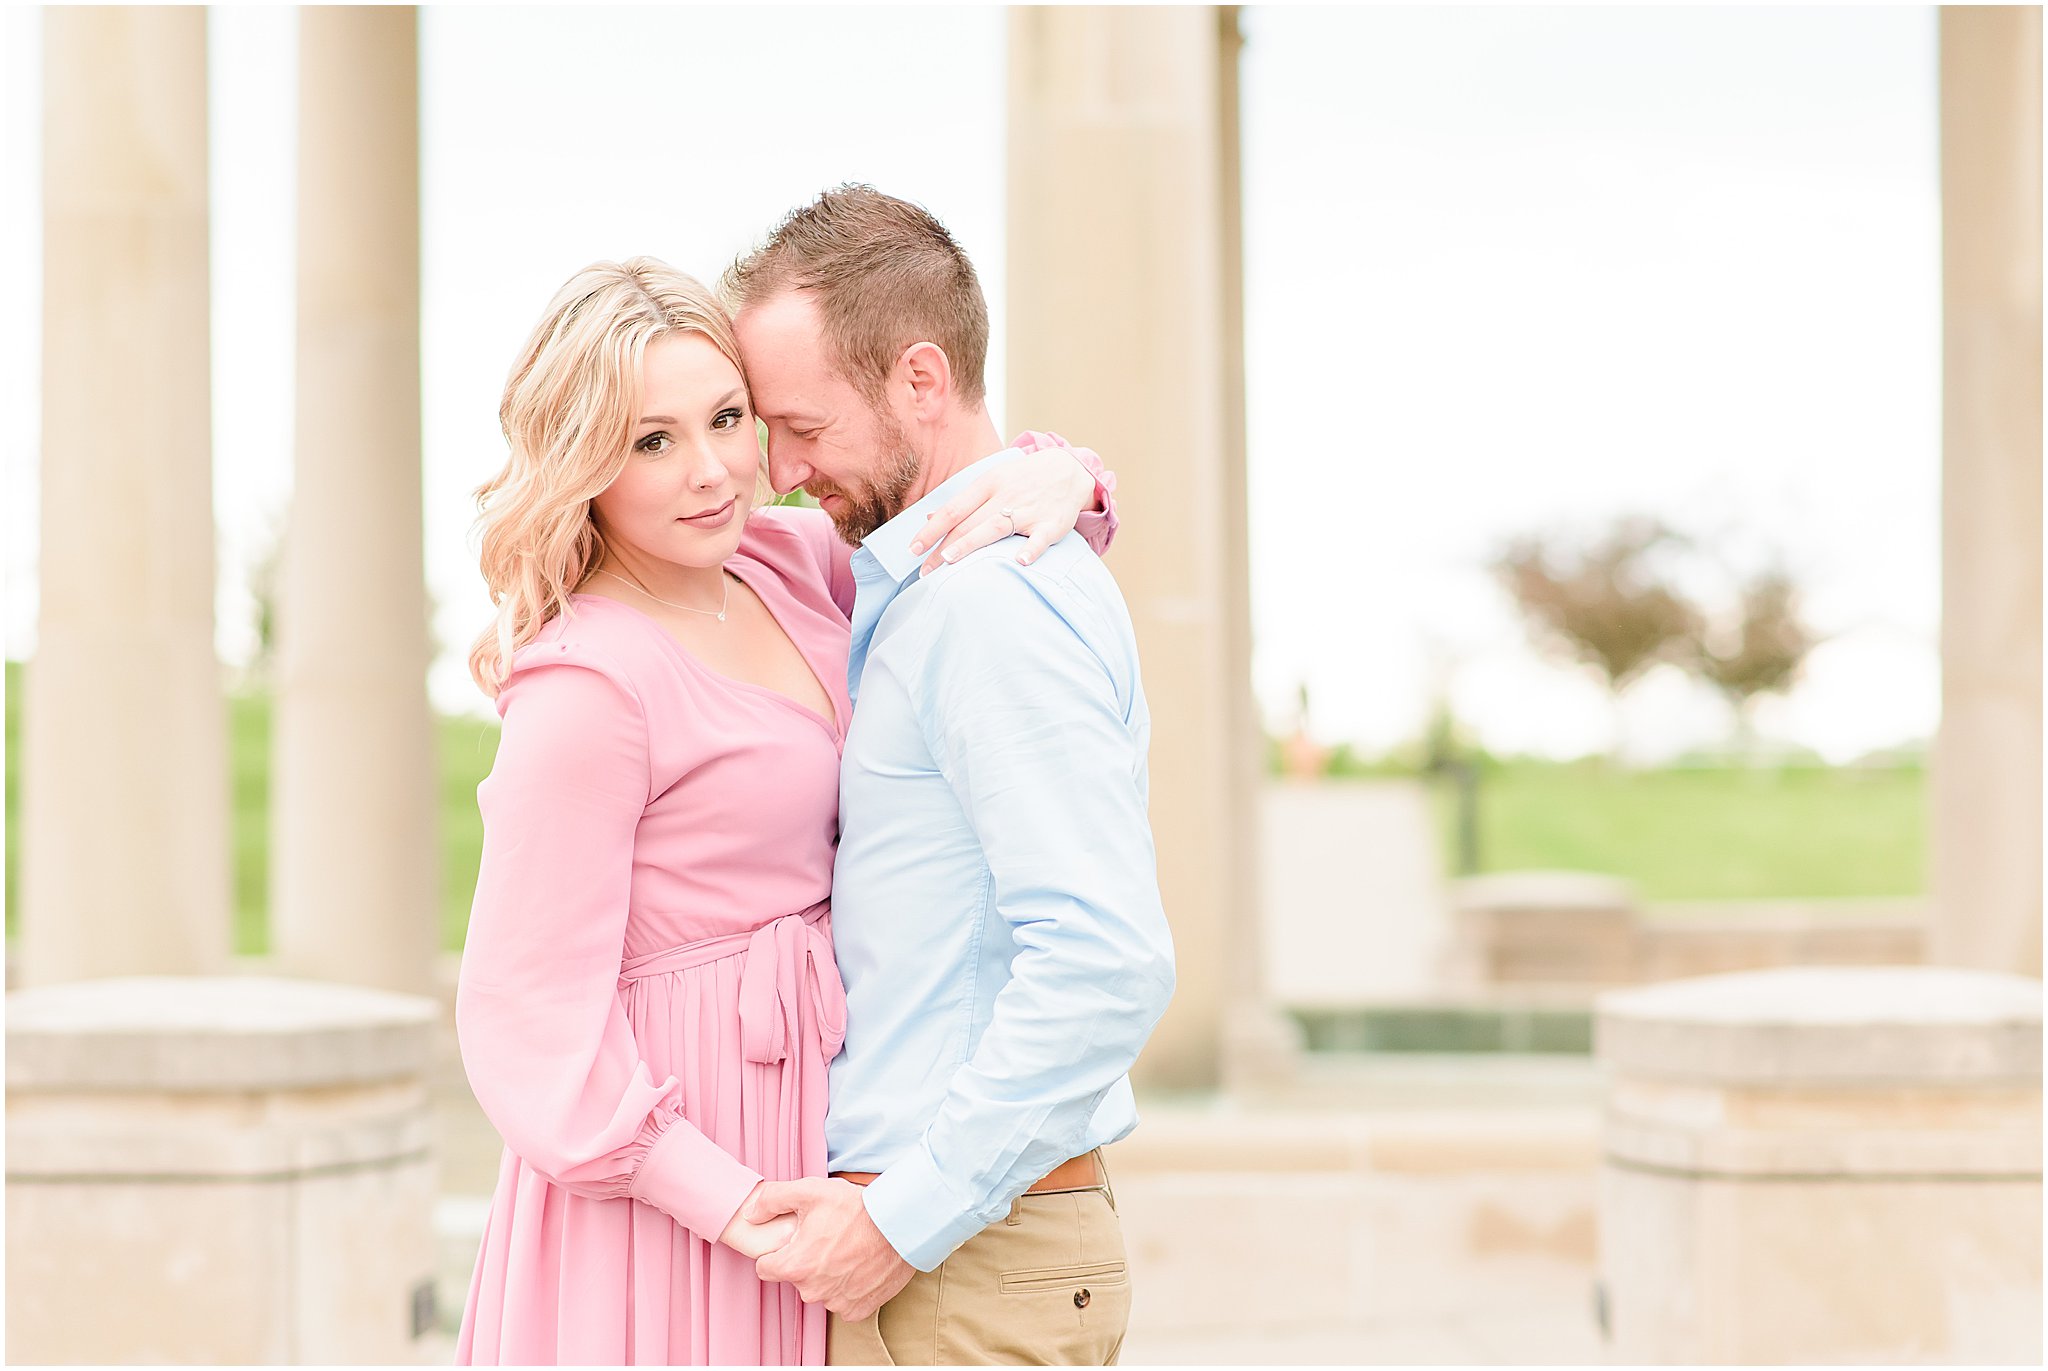 Couple nuzzling by gazebo during Coxhall Gardens engagement session